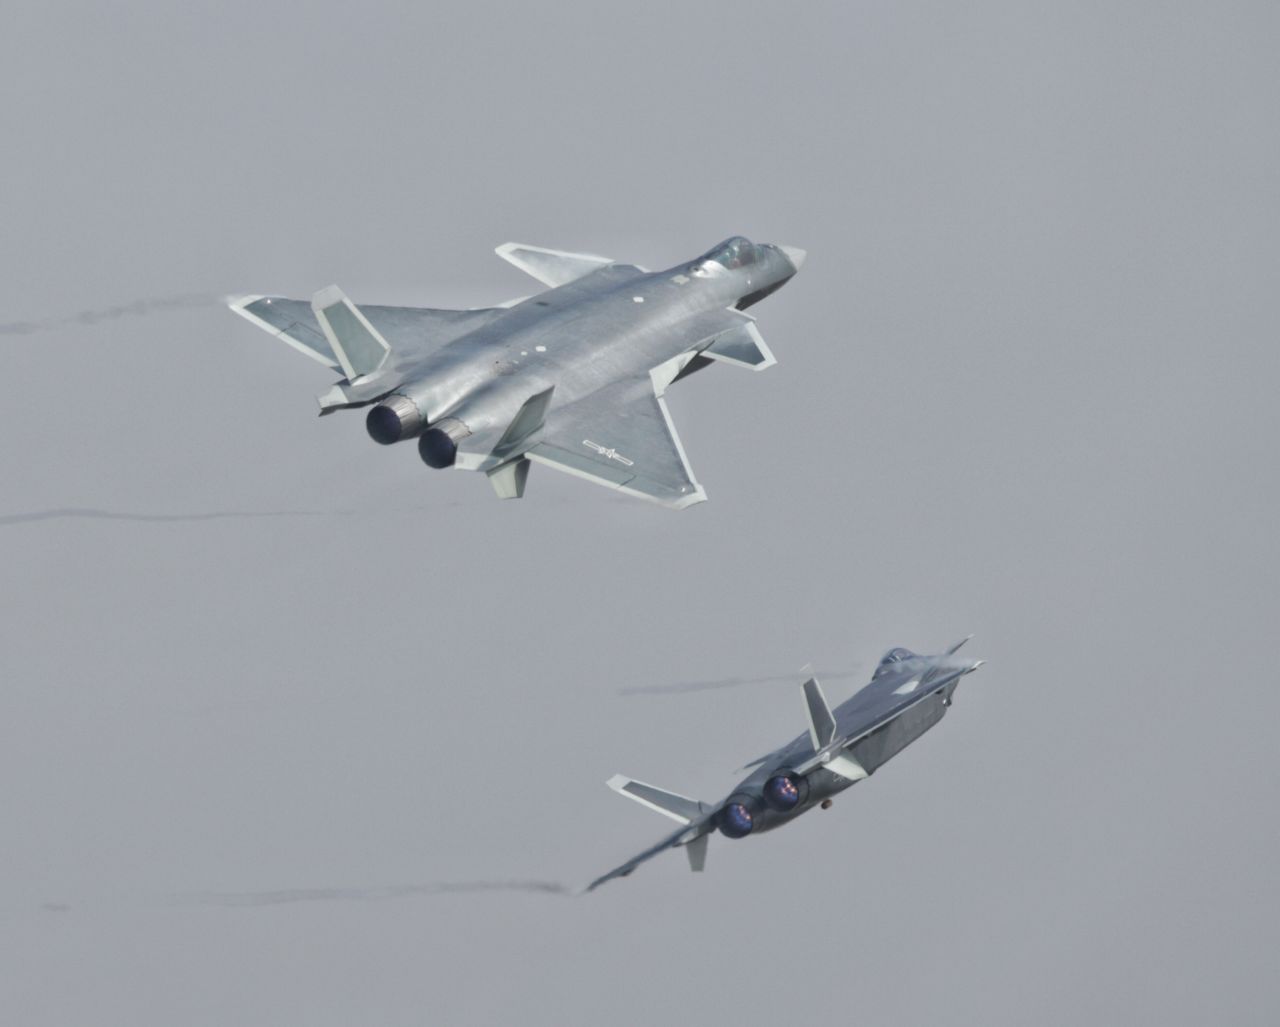 <strong>Chinese J-20 stealth fighters perform during the 11th China International Aviation and Aerospace Exhibition, also known as Airshow China 2016, in Zhuhai on November 1, 2016. The J-20 is one of China's answers to US F-22 and F-35 stealth fighters.</strong>